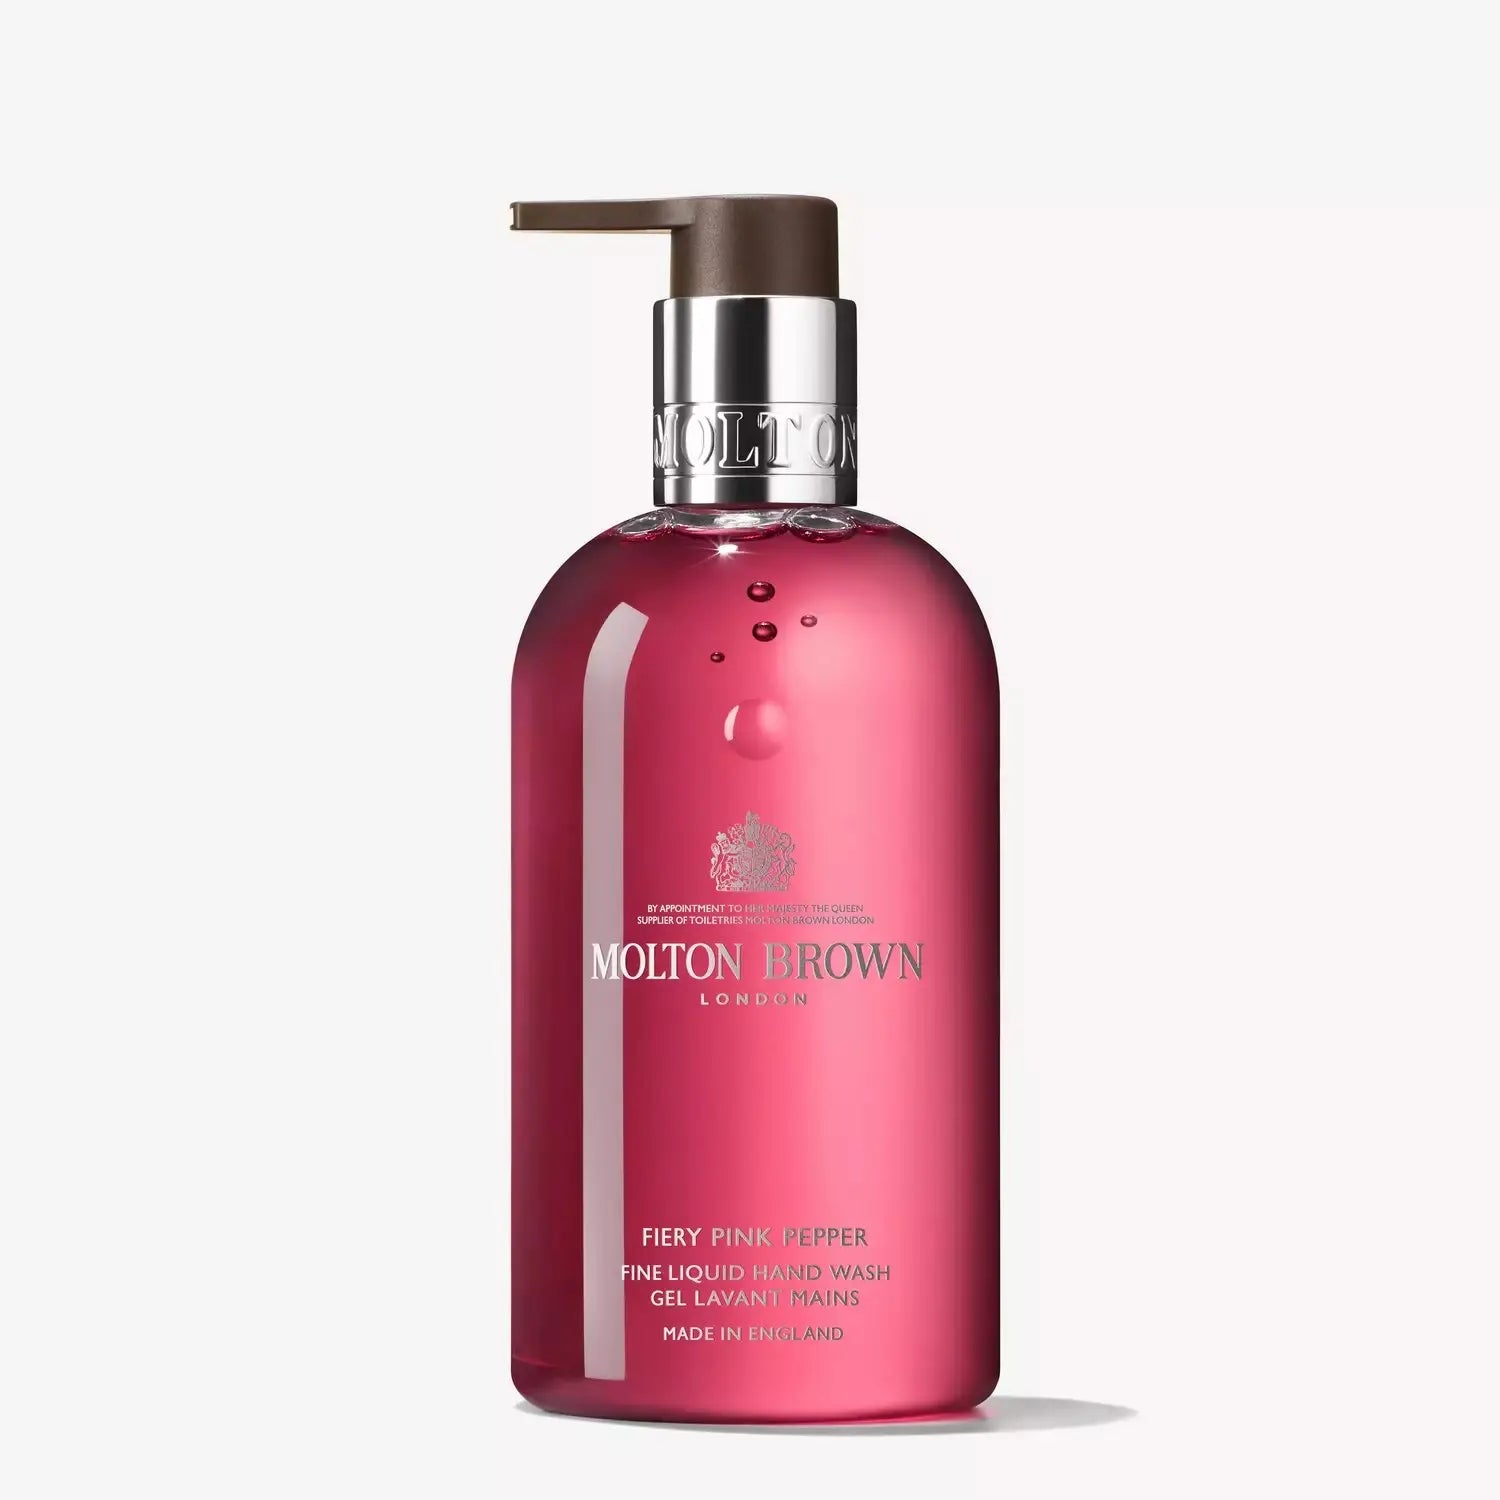 Molton Brown Fiery Pink Pepper Hand Wash